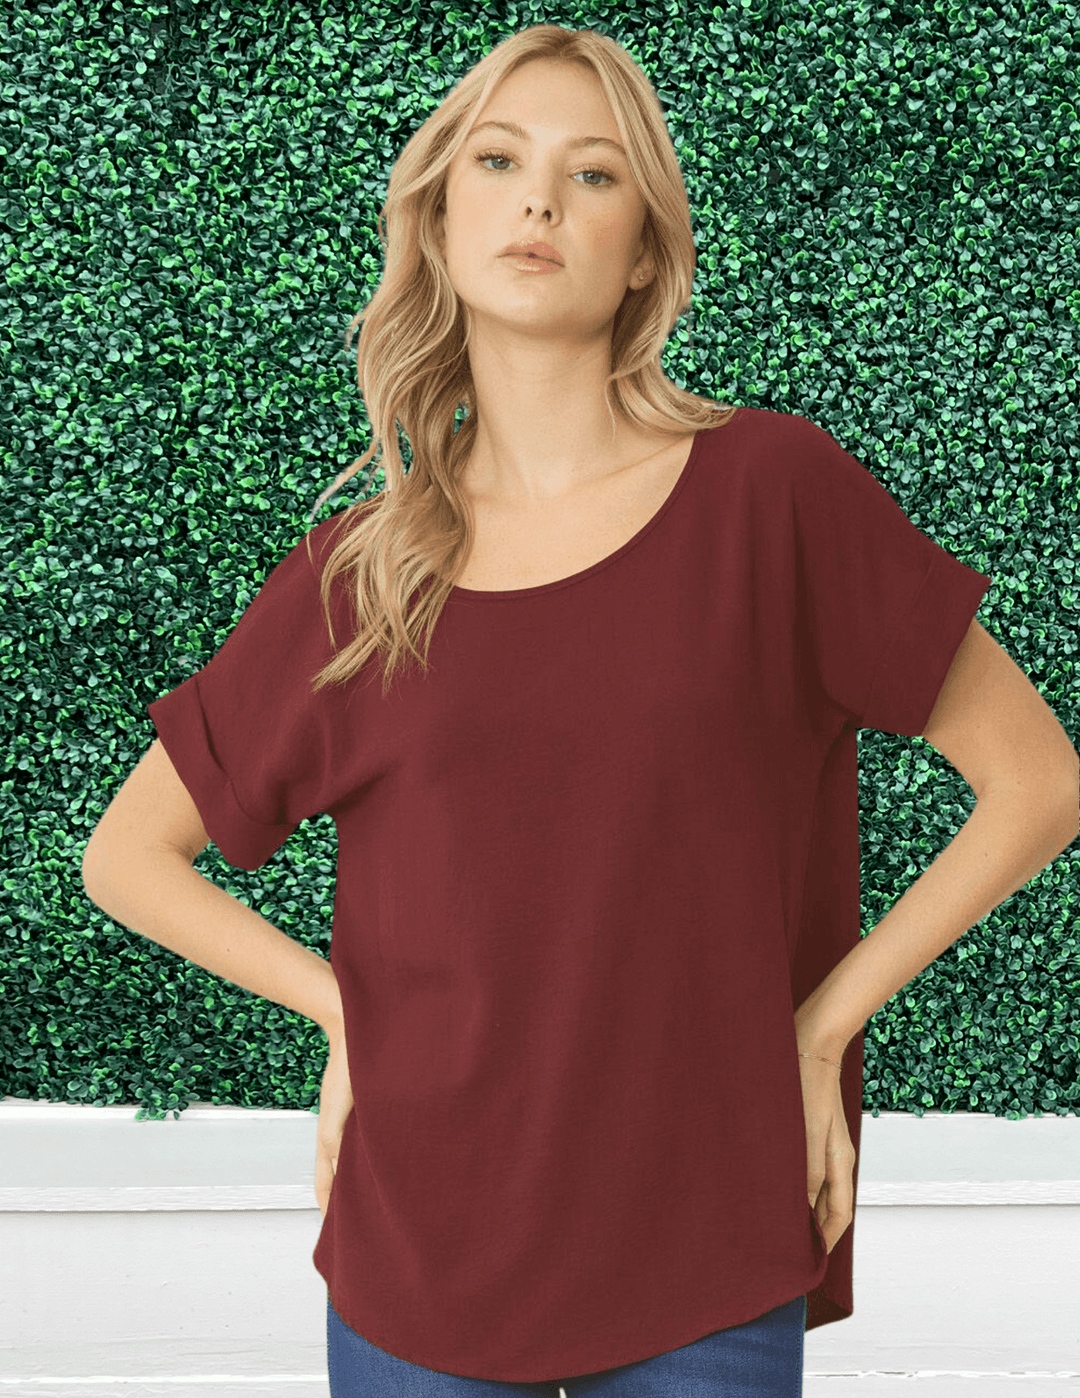 entro clothing brand boutique cuff sleeve scoop neck